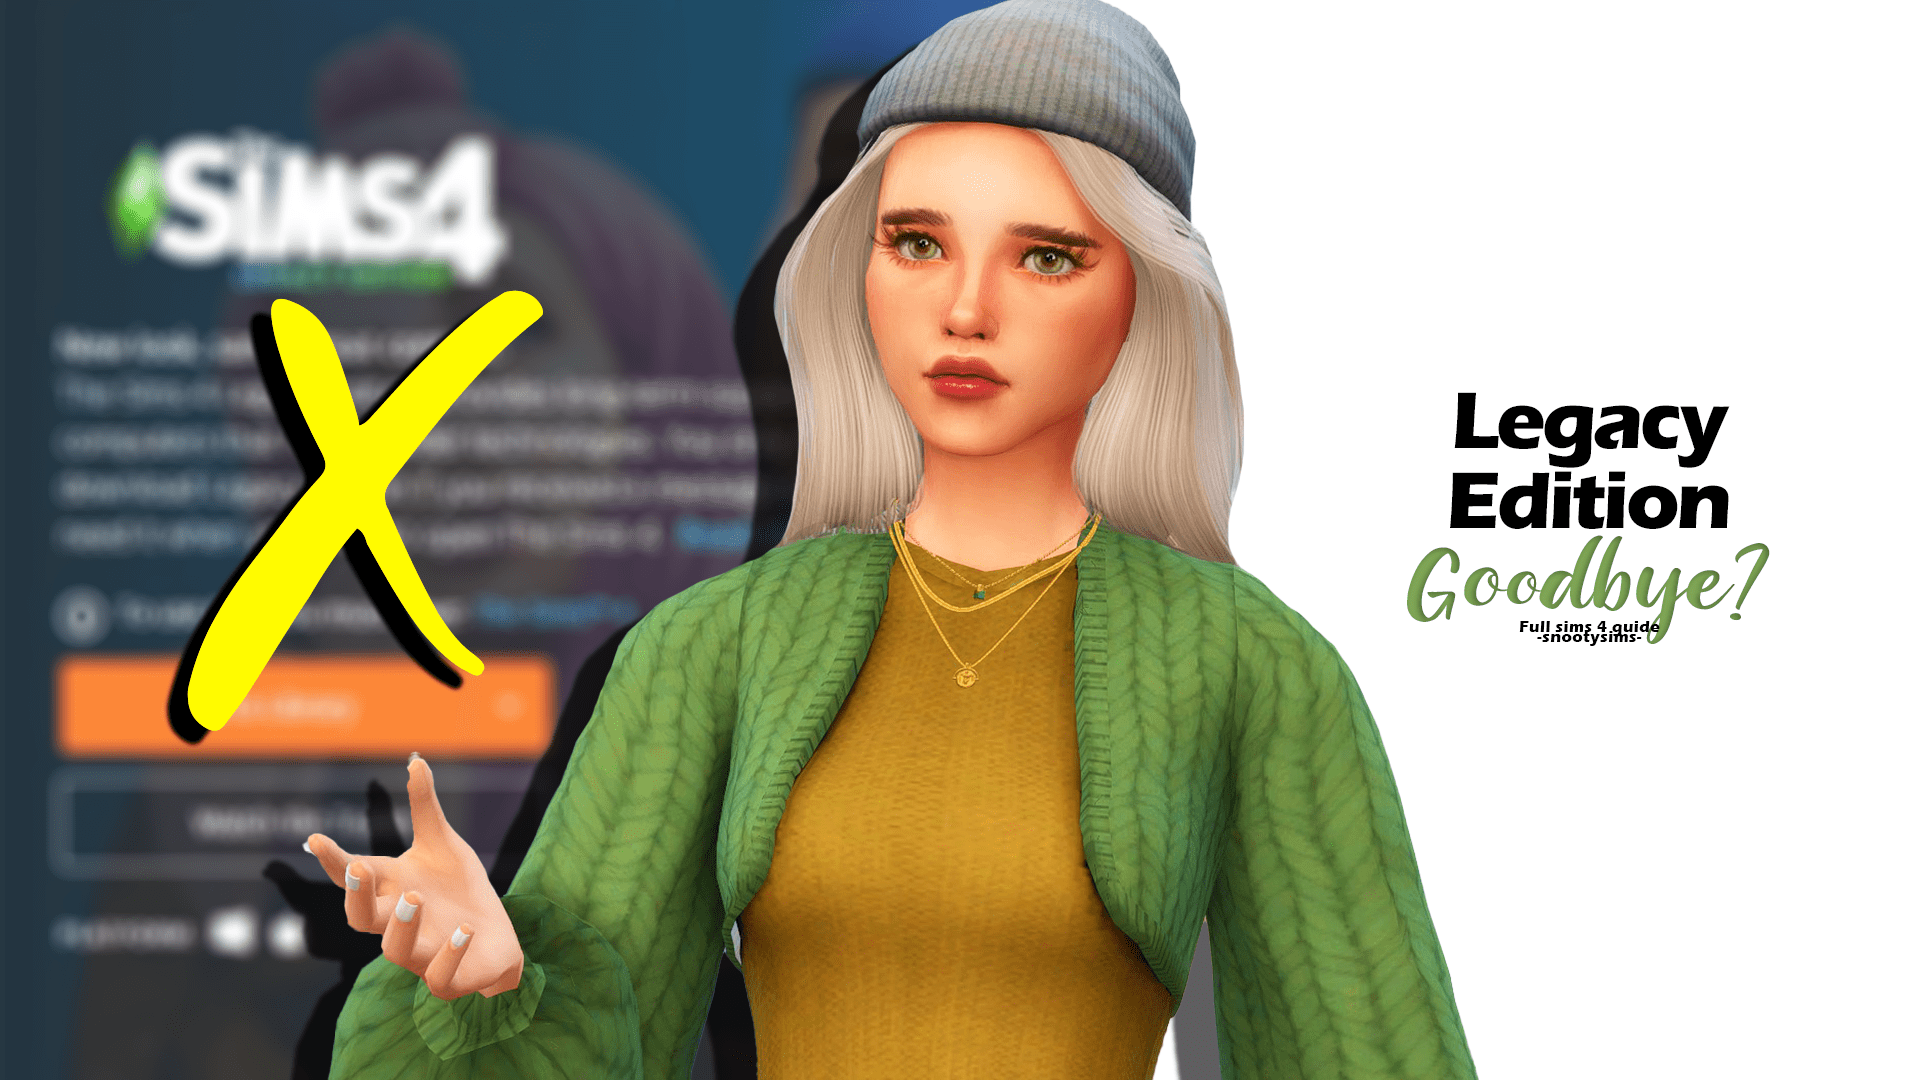 Heads Up Simmers The Sims 4 Legacy Edition Will Soon Say Goodbye To